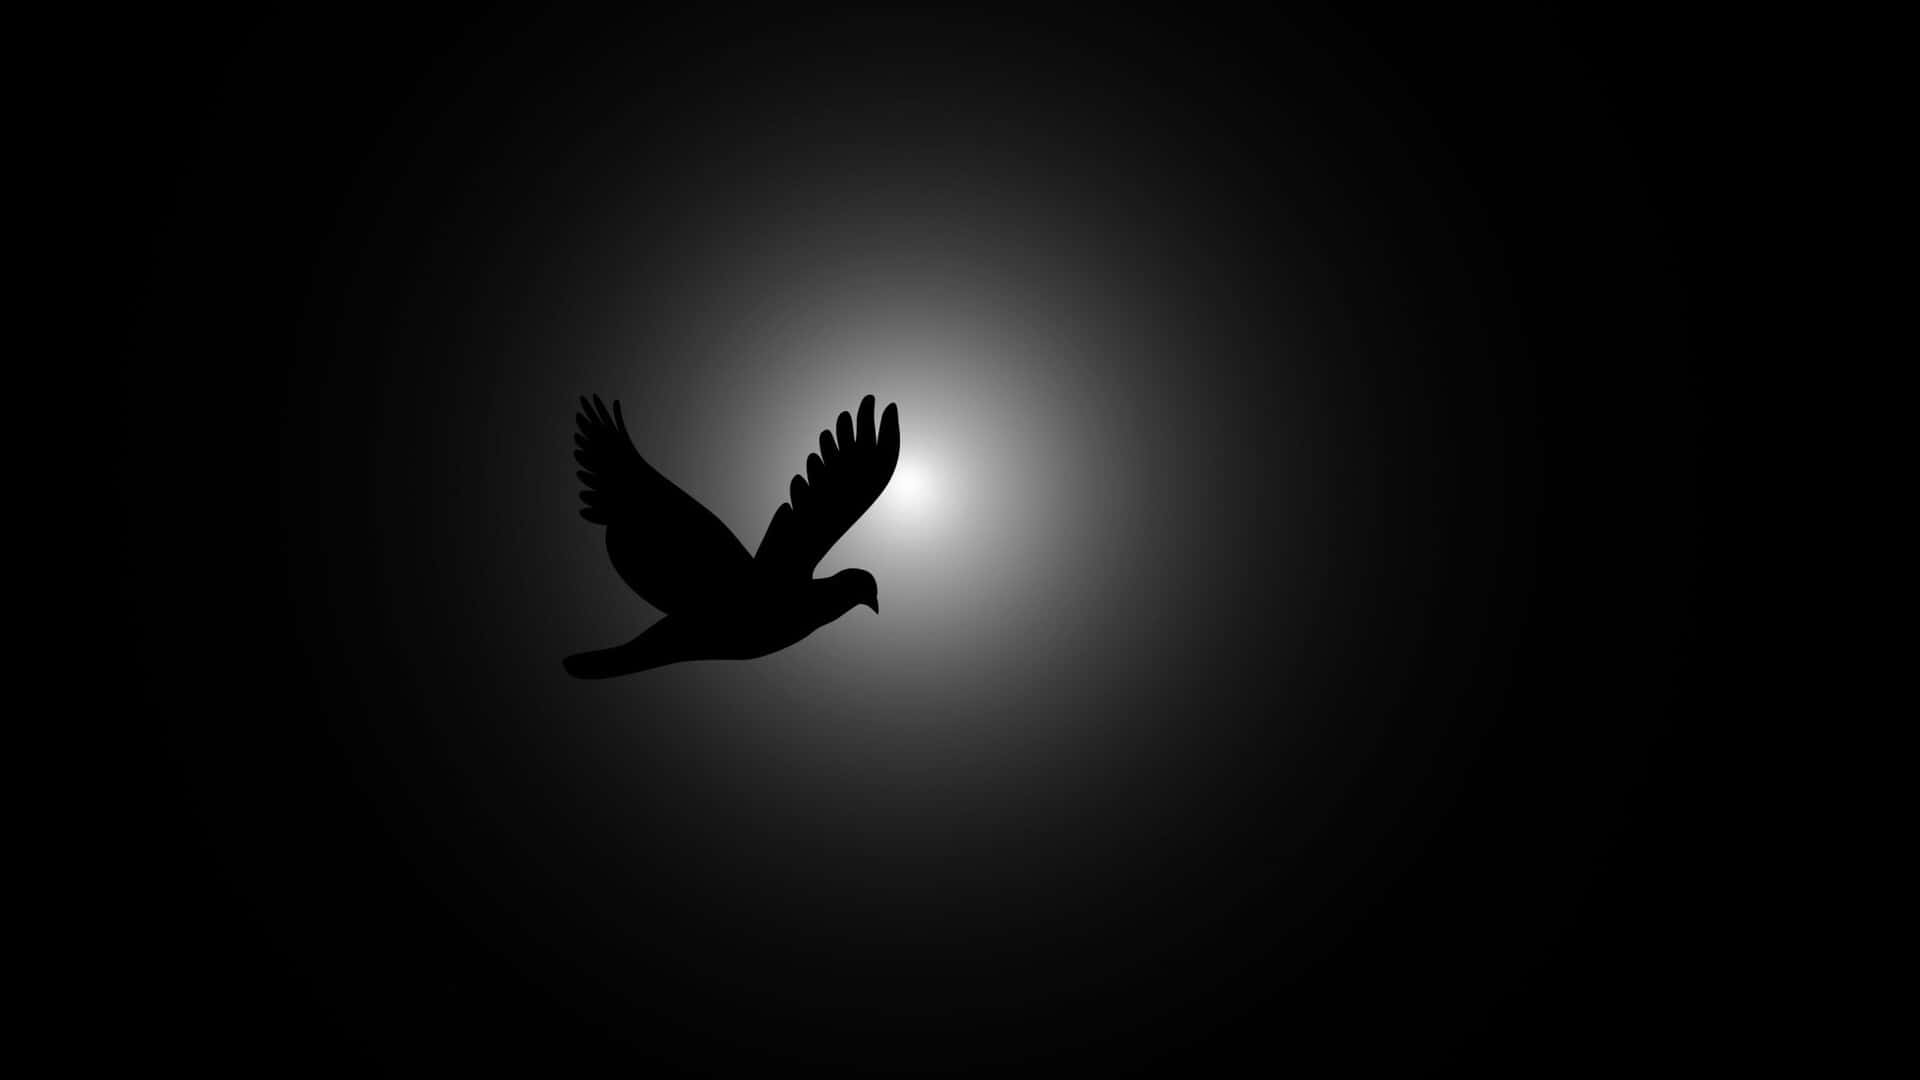 Flying Bird Silhouette Of A Dove Wallpaper